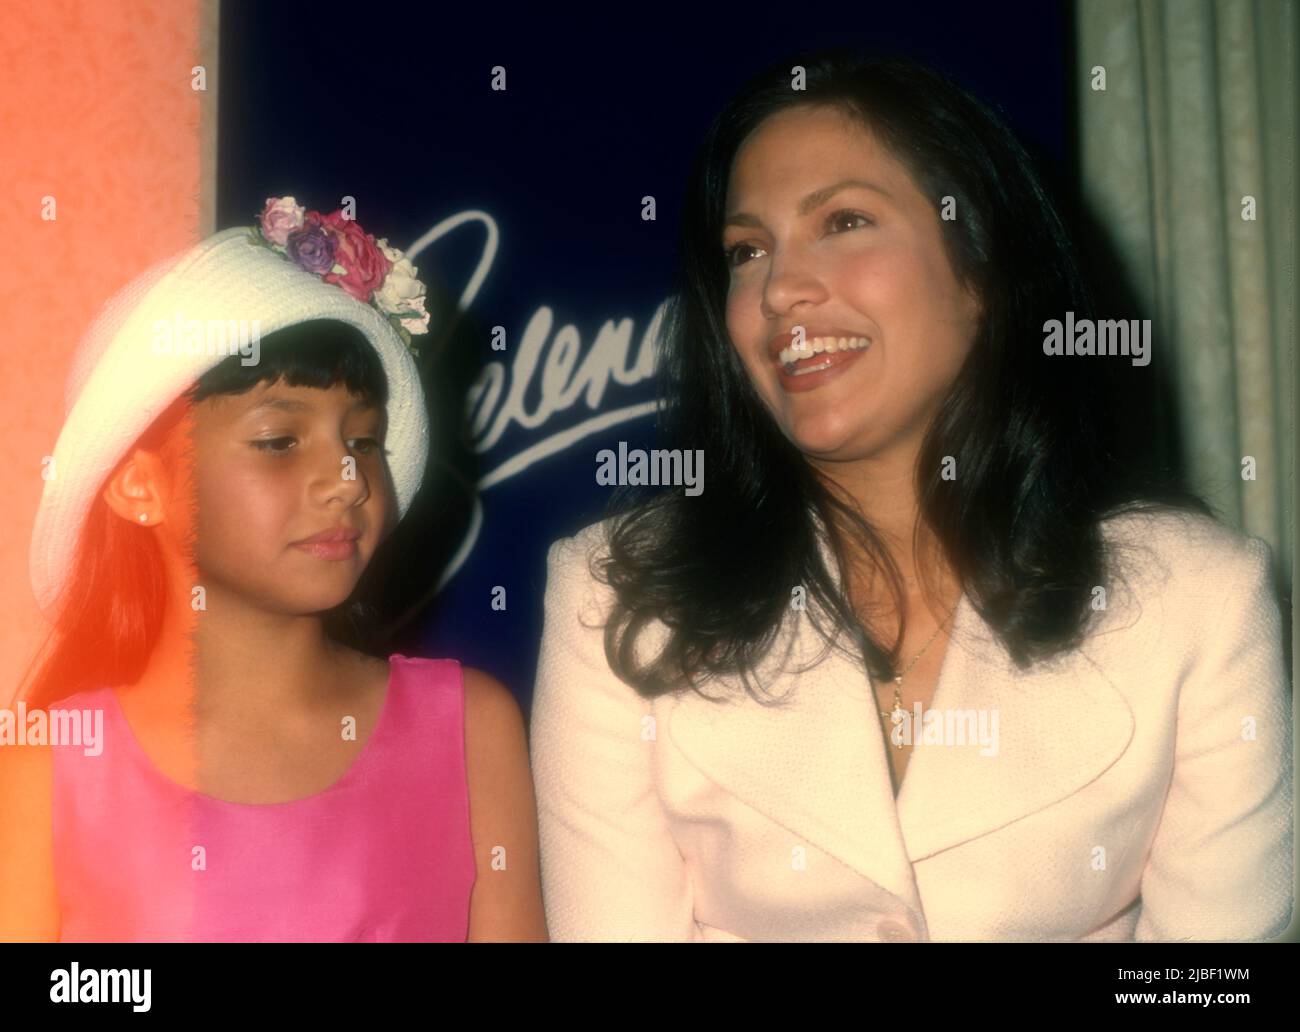 Beverly Hills, California, USA 18th June 1996 Actress Becky Lee Meza and Actress/Singer Jennifer Lopez attend 'Selena' Press Conference on June 18, 1996 at The Four Seasons Hotel in Beverly Hills, California, USA. Photo by Barry King/Alamy Stock Photo Stock Photo